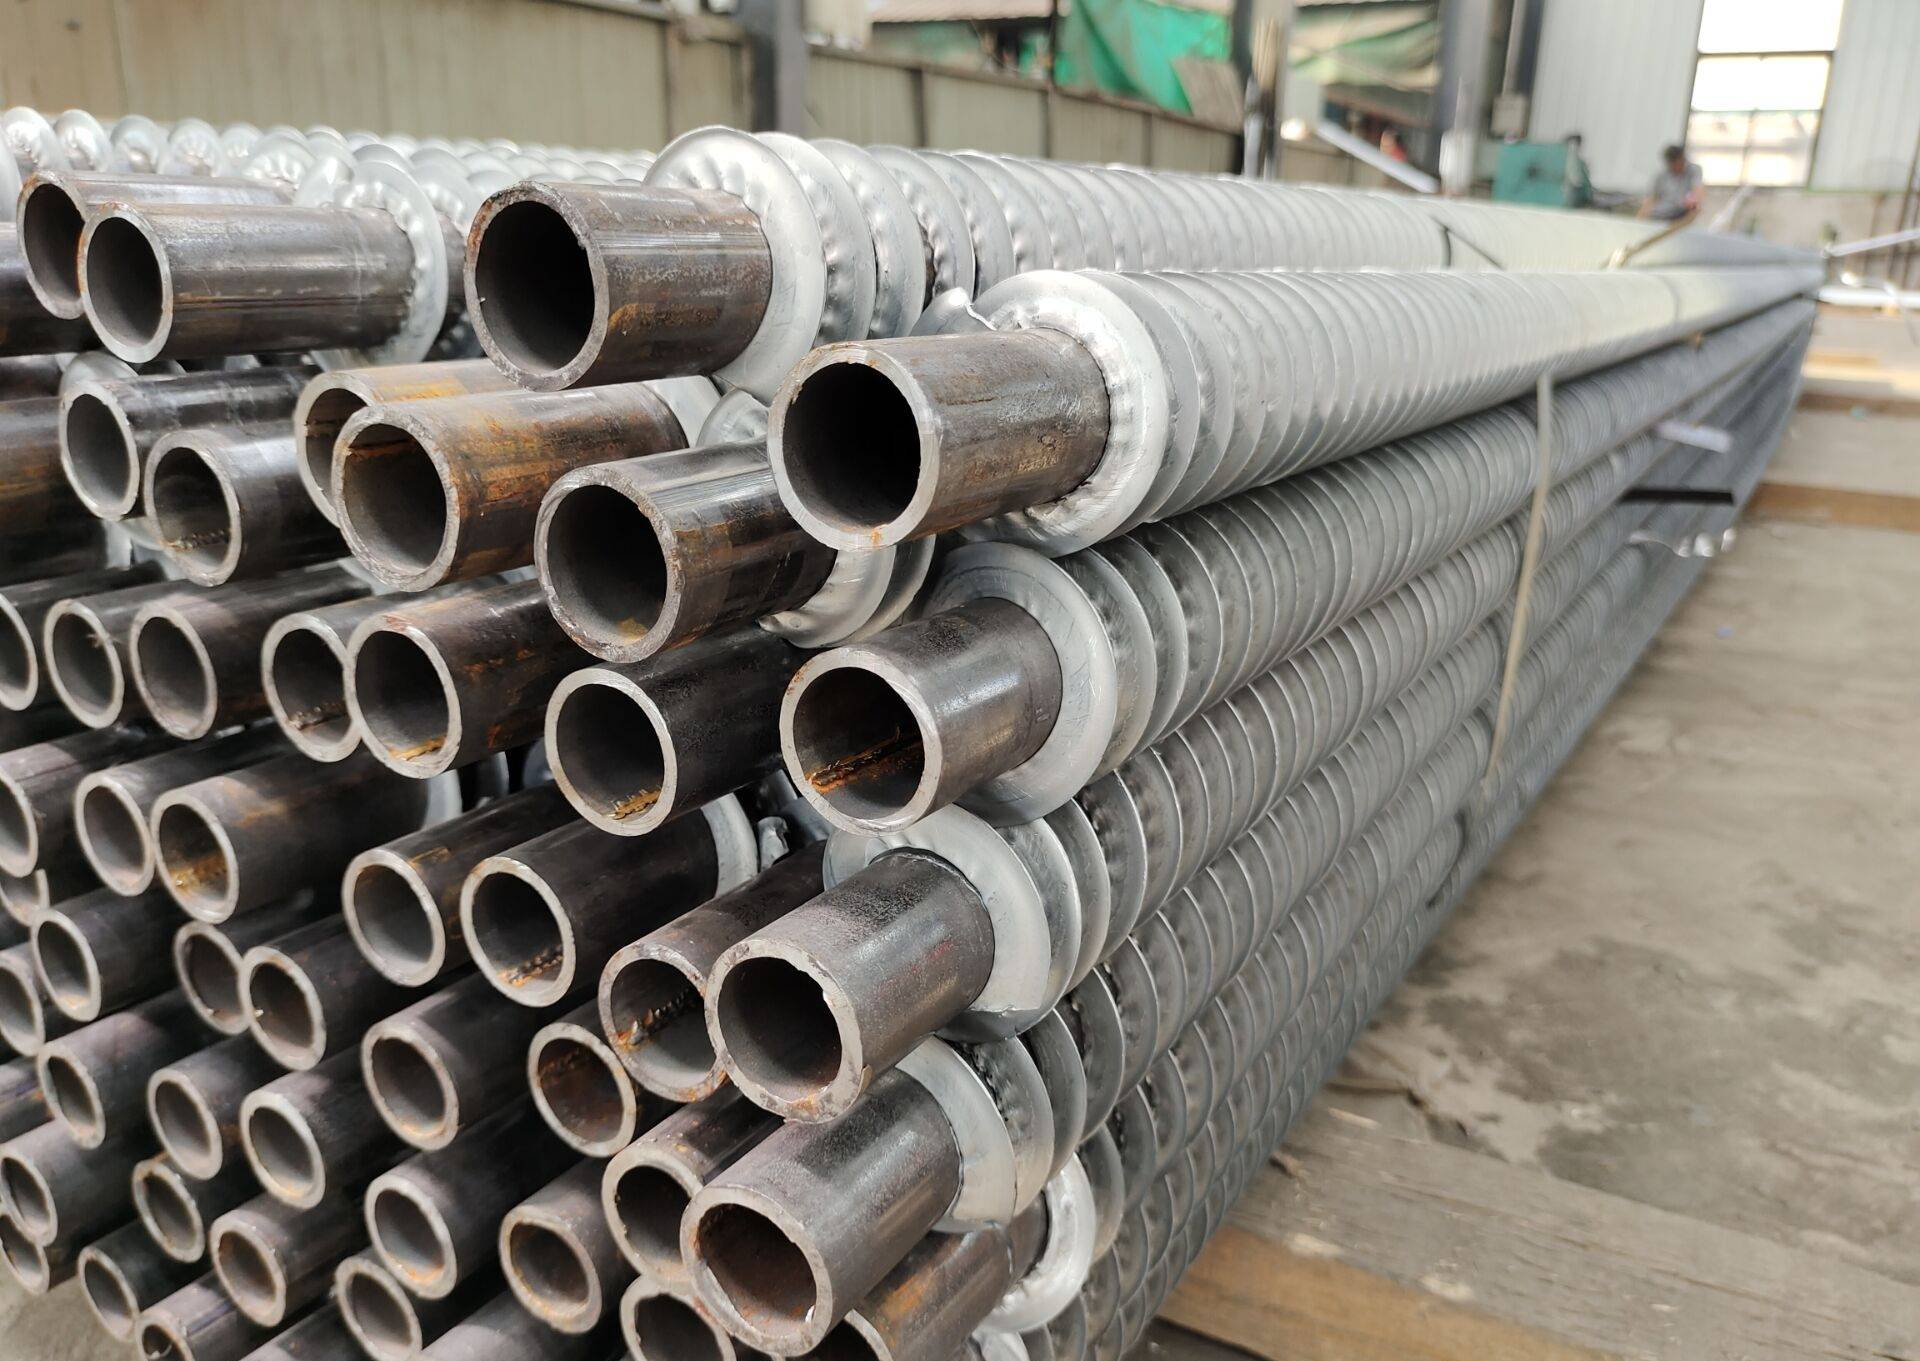 Short-term steel prices may continue to rise